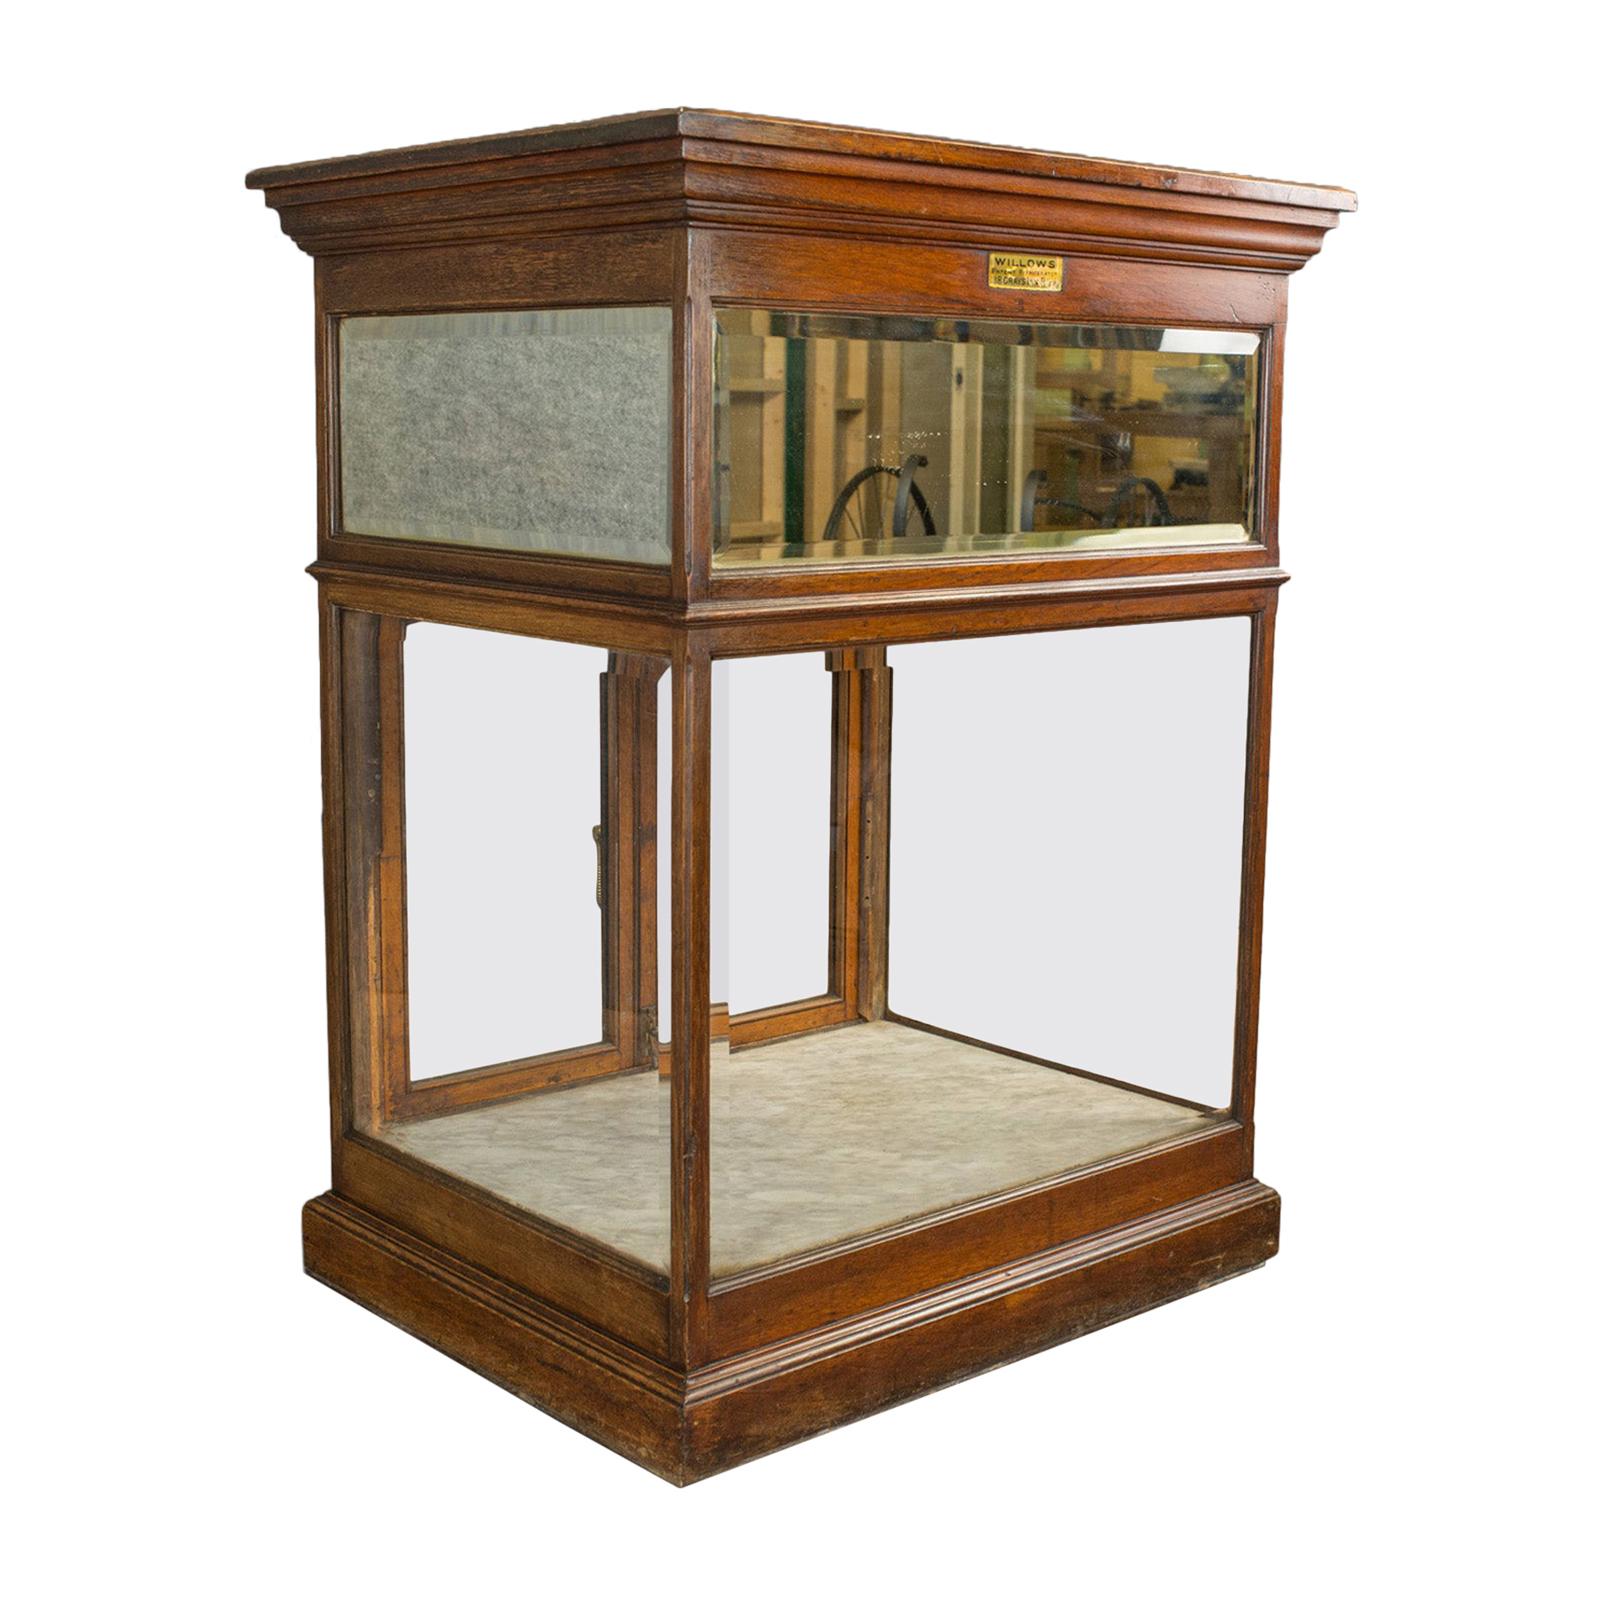 Antique Shop Display Cabinet, English, Edward Willows, Patented, circa 1905 For Sale